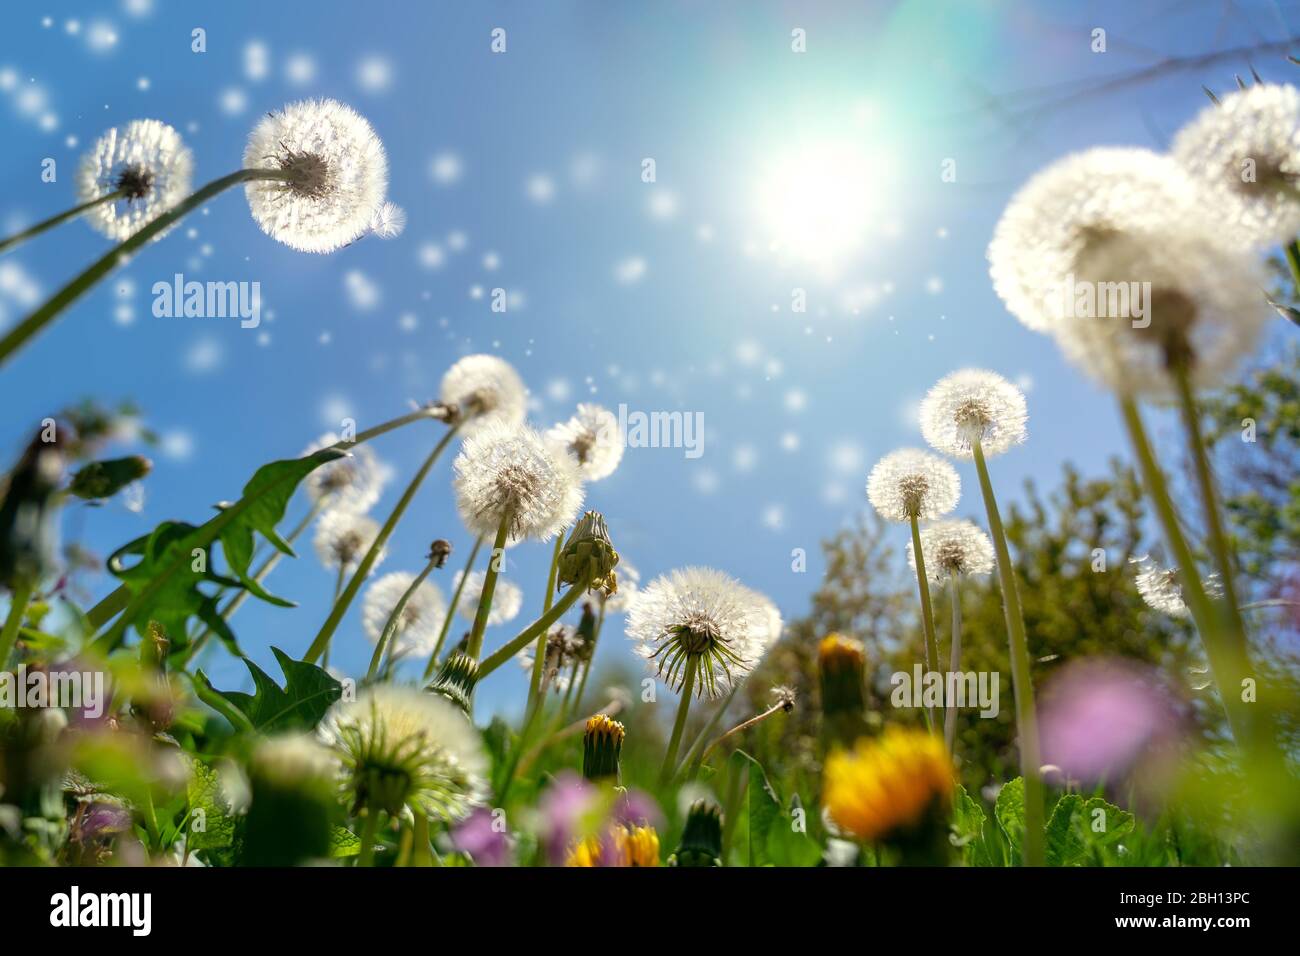 magical fluffy dandelions reaching to the sky on a beautiful wild flower meadow Stock Photo